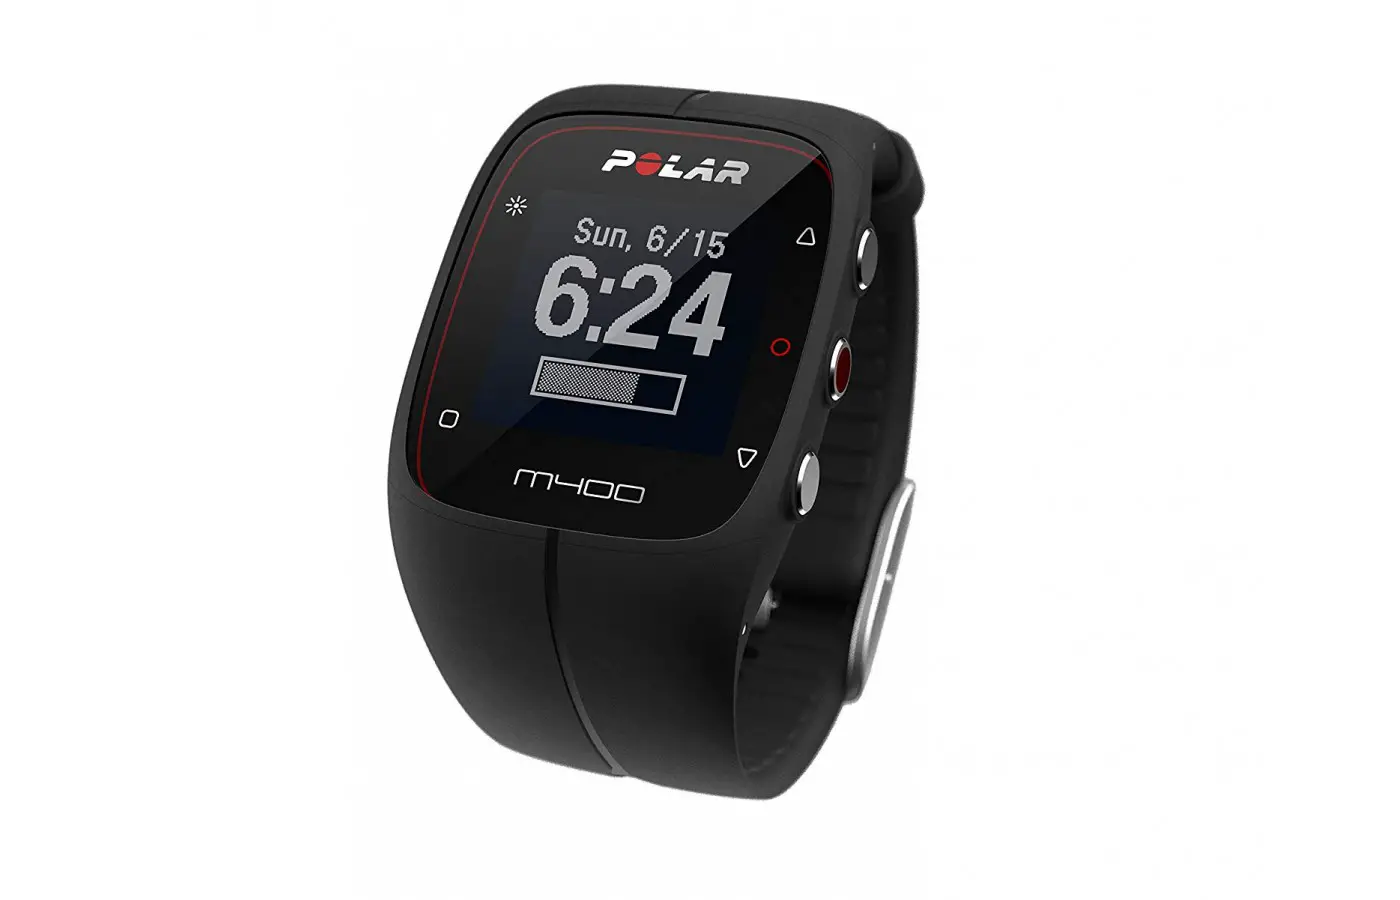 Polar M400 displays the time and date when not using for tracking